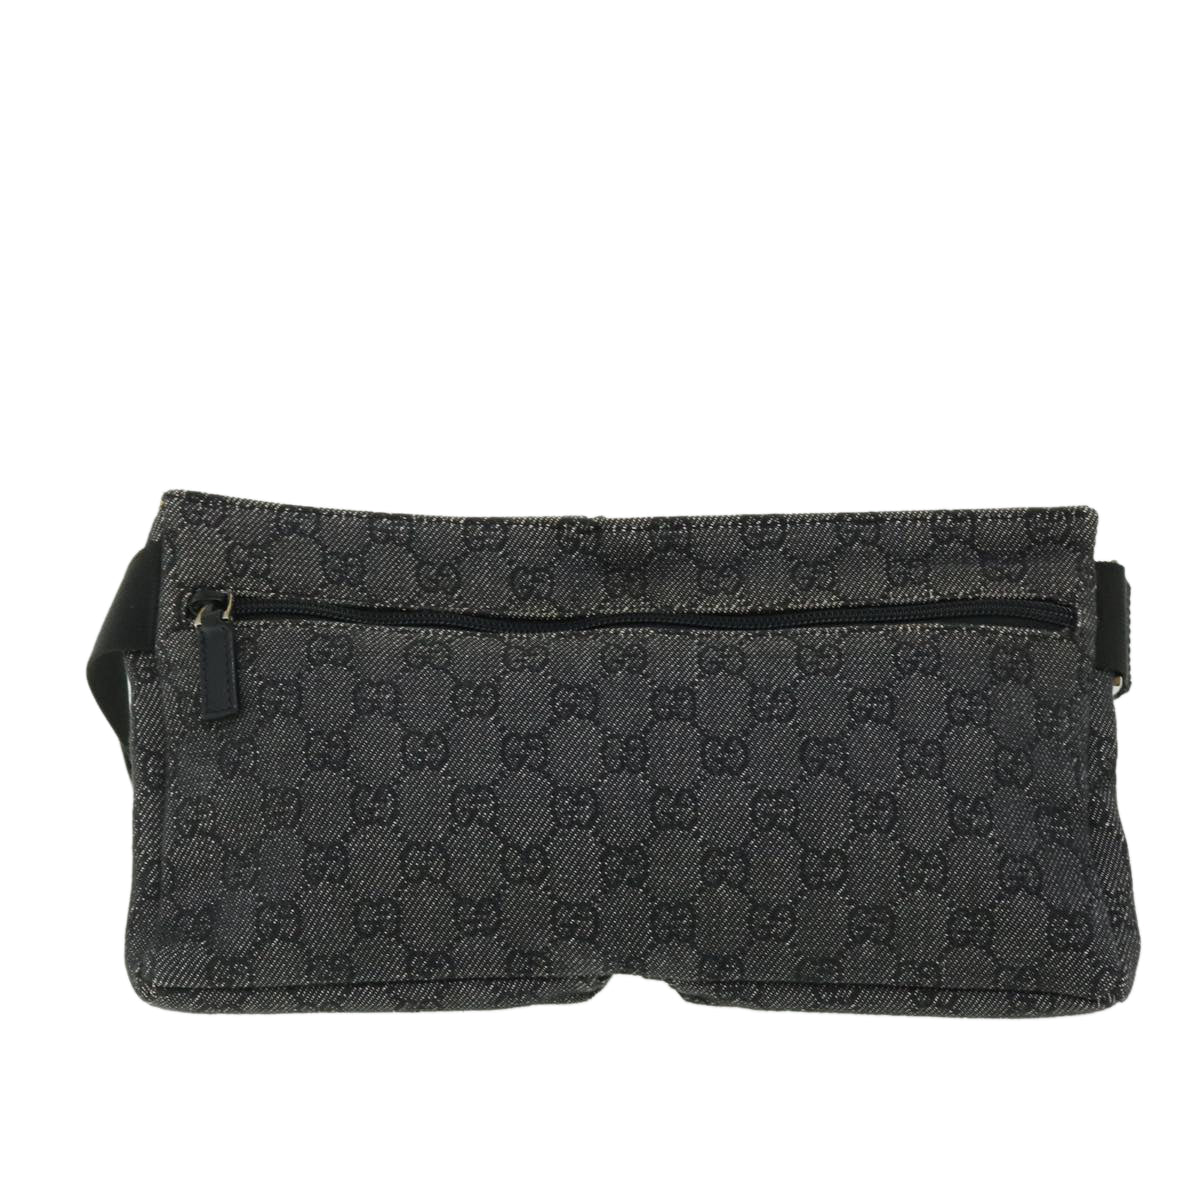 GUCCI GG Canvas Waist bag Leather Gray 28566 Auth 51469